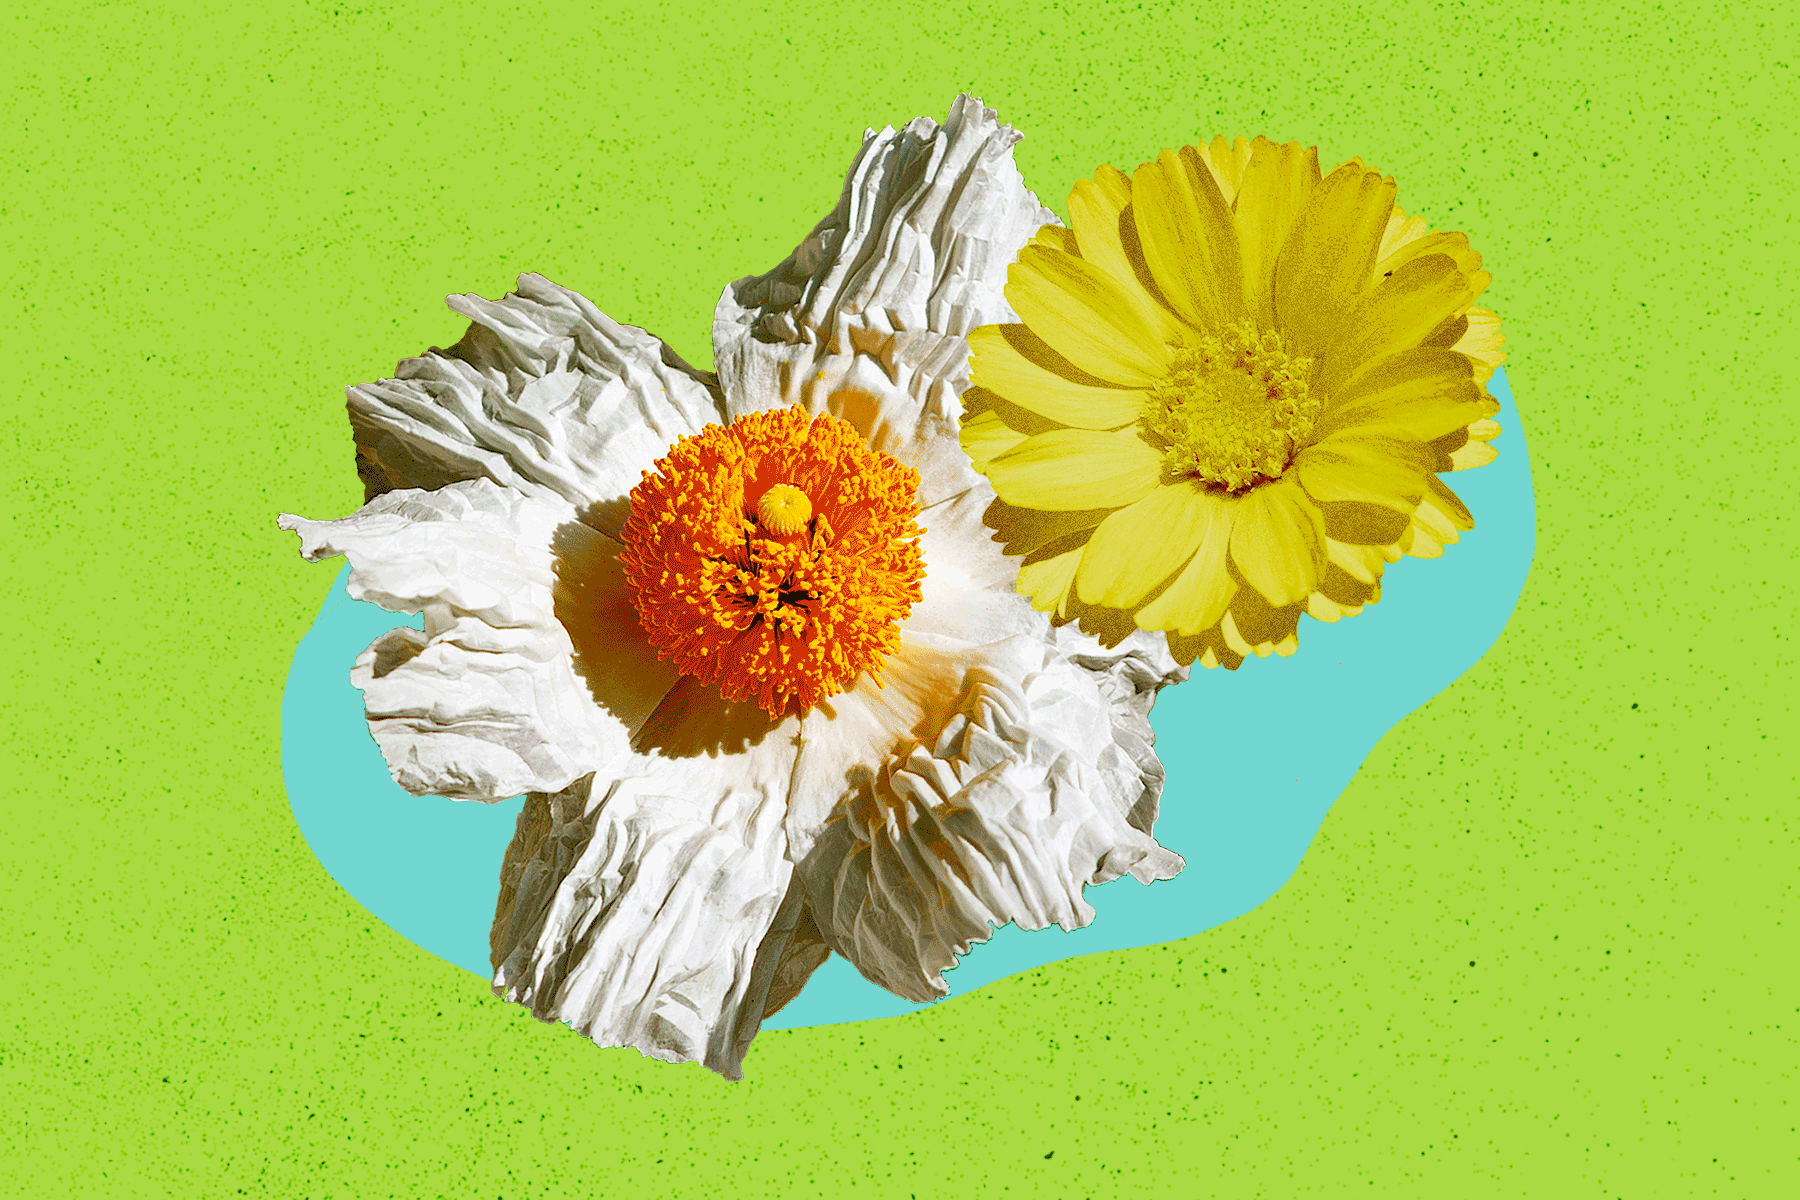 A GIF of a yellow flower next to a white flower on a solid green background.